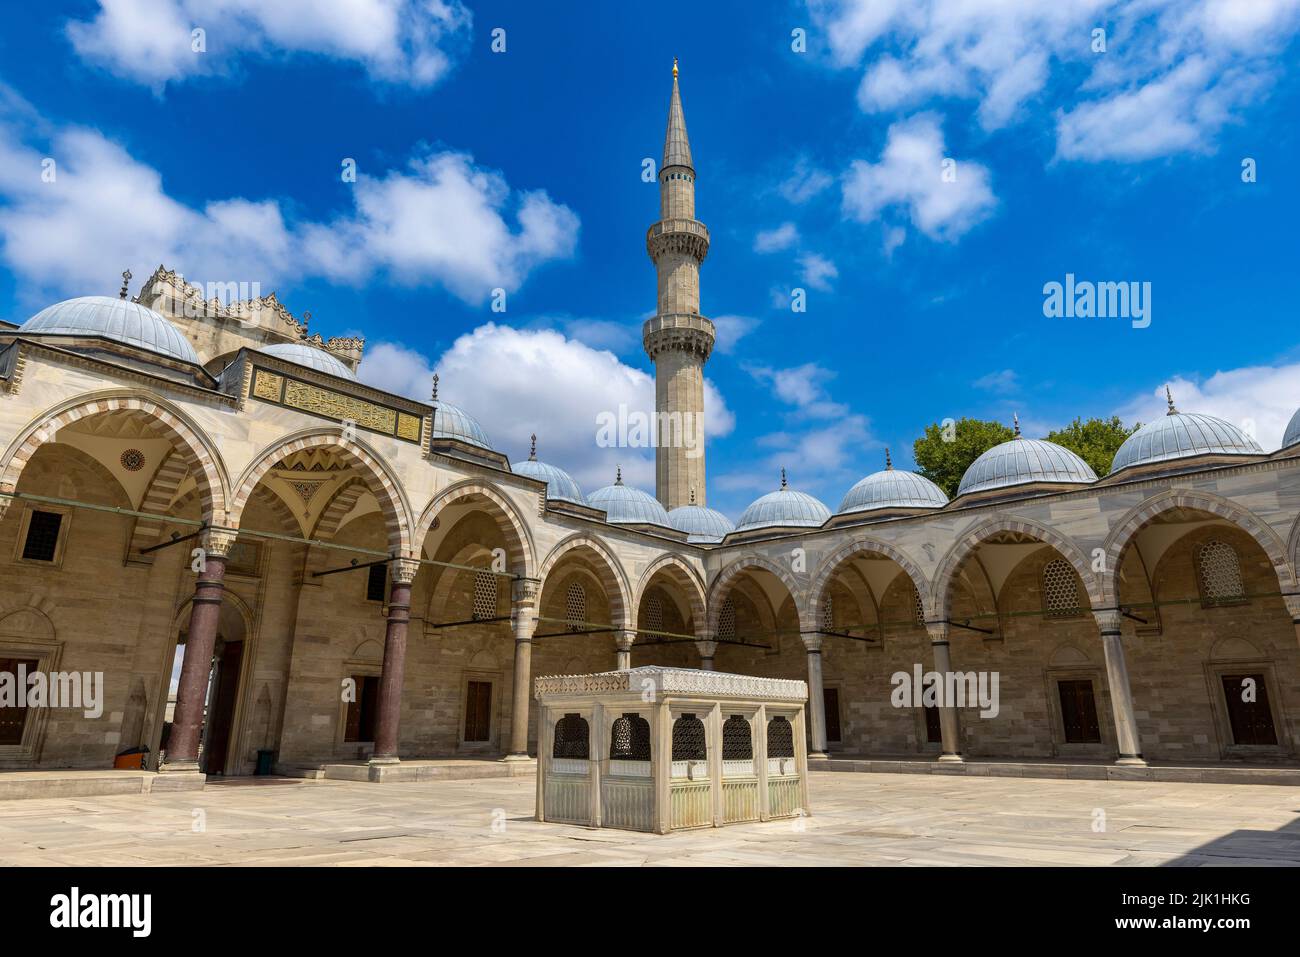 detail of a structure inside the topkapi palace in istanbul Stock Photo